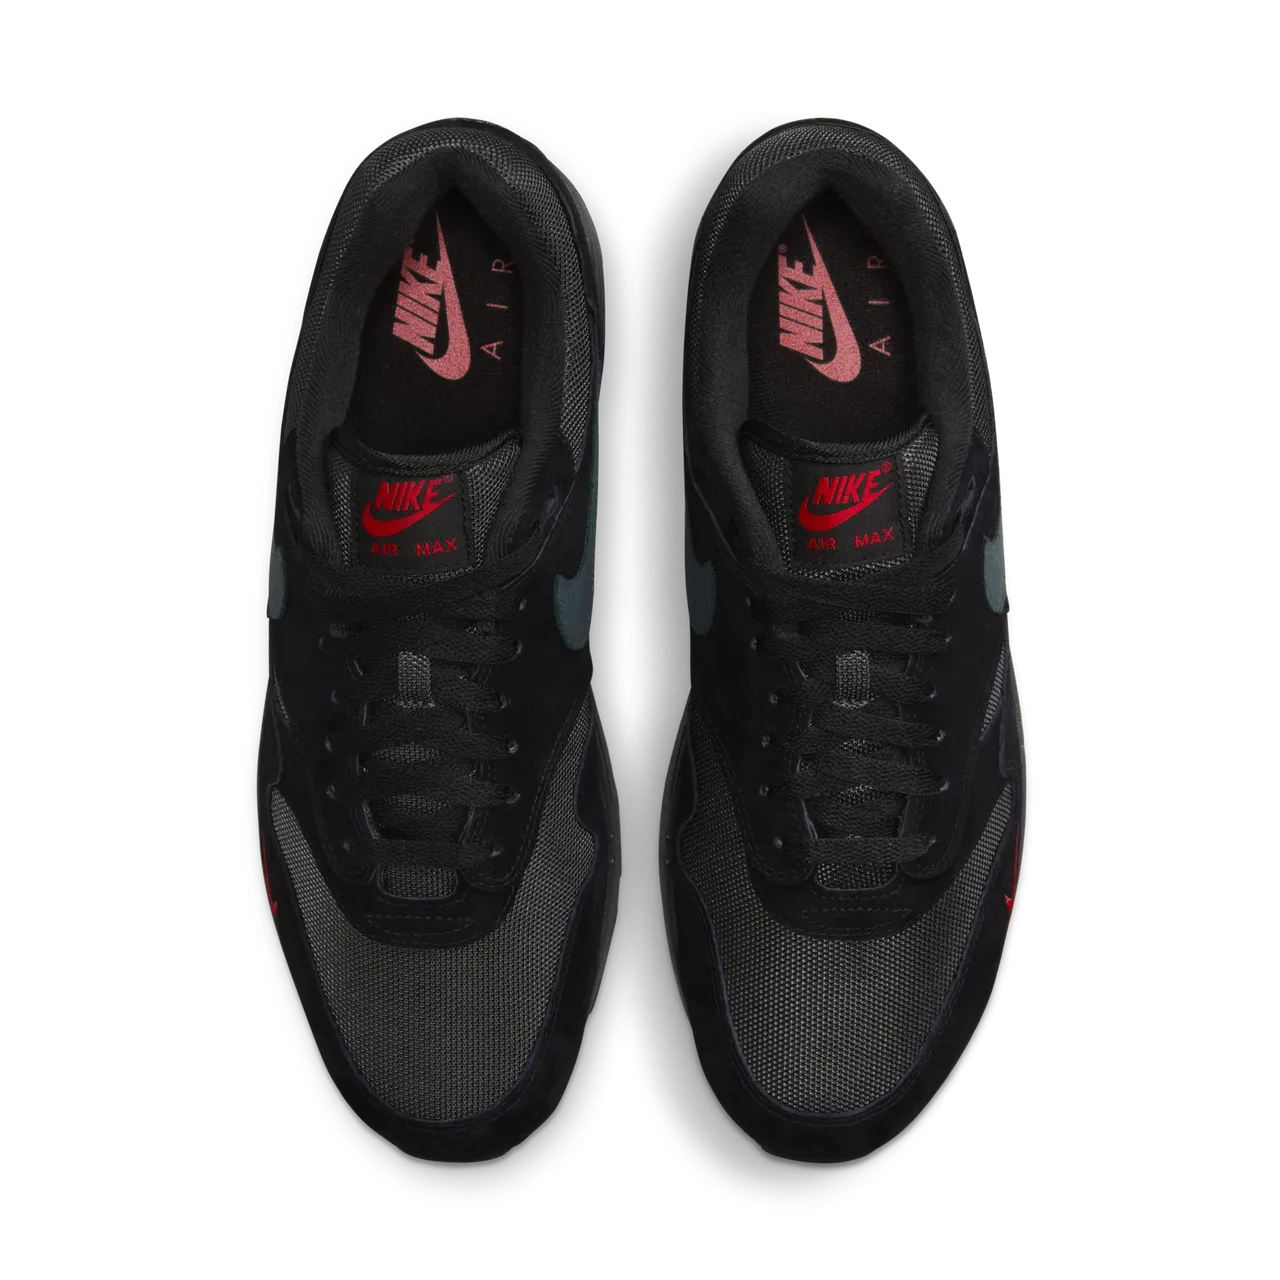 Nike Air Max 1 Men's Shoes - Black - Leather